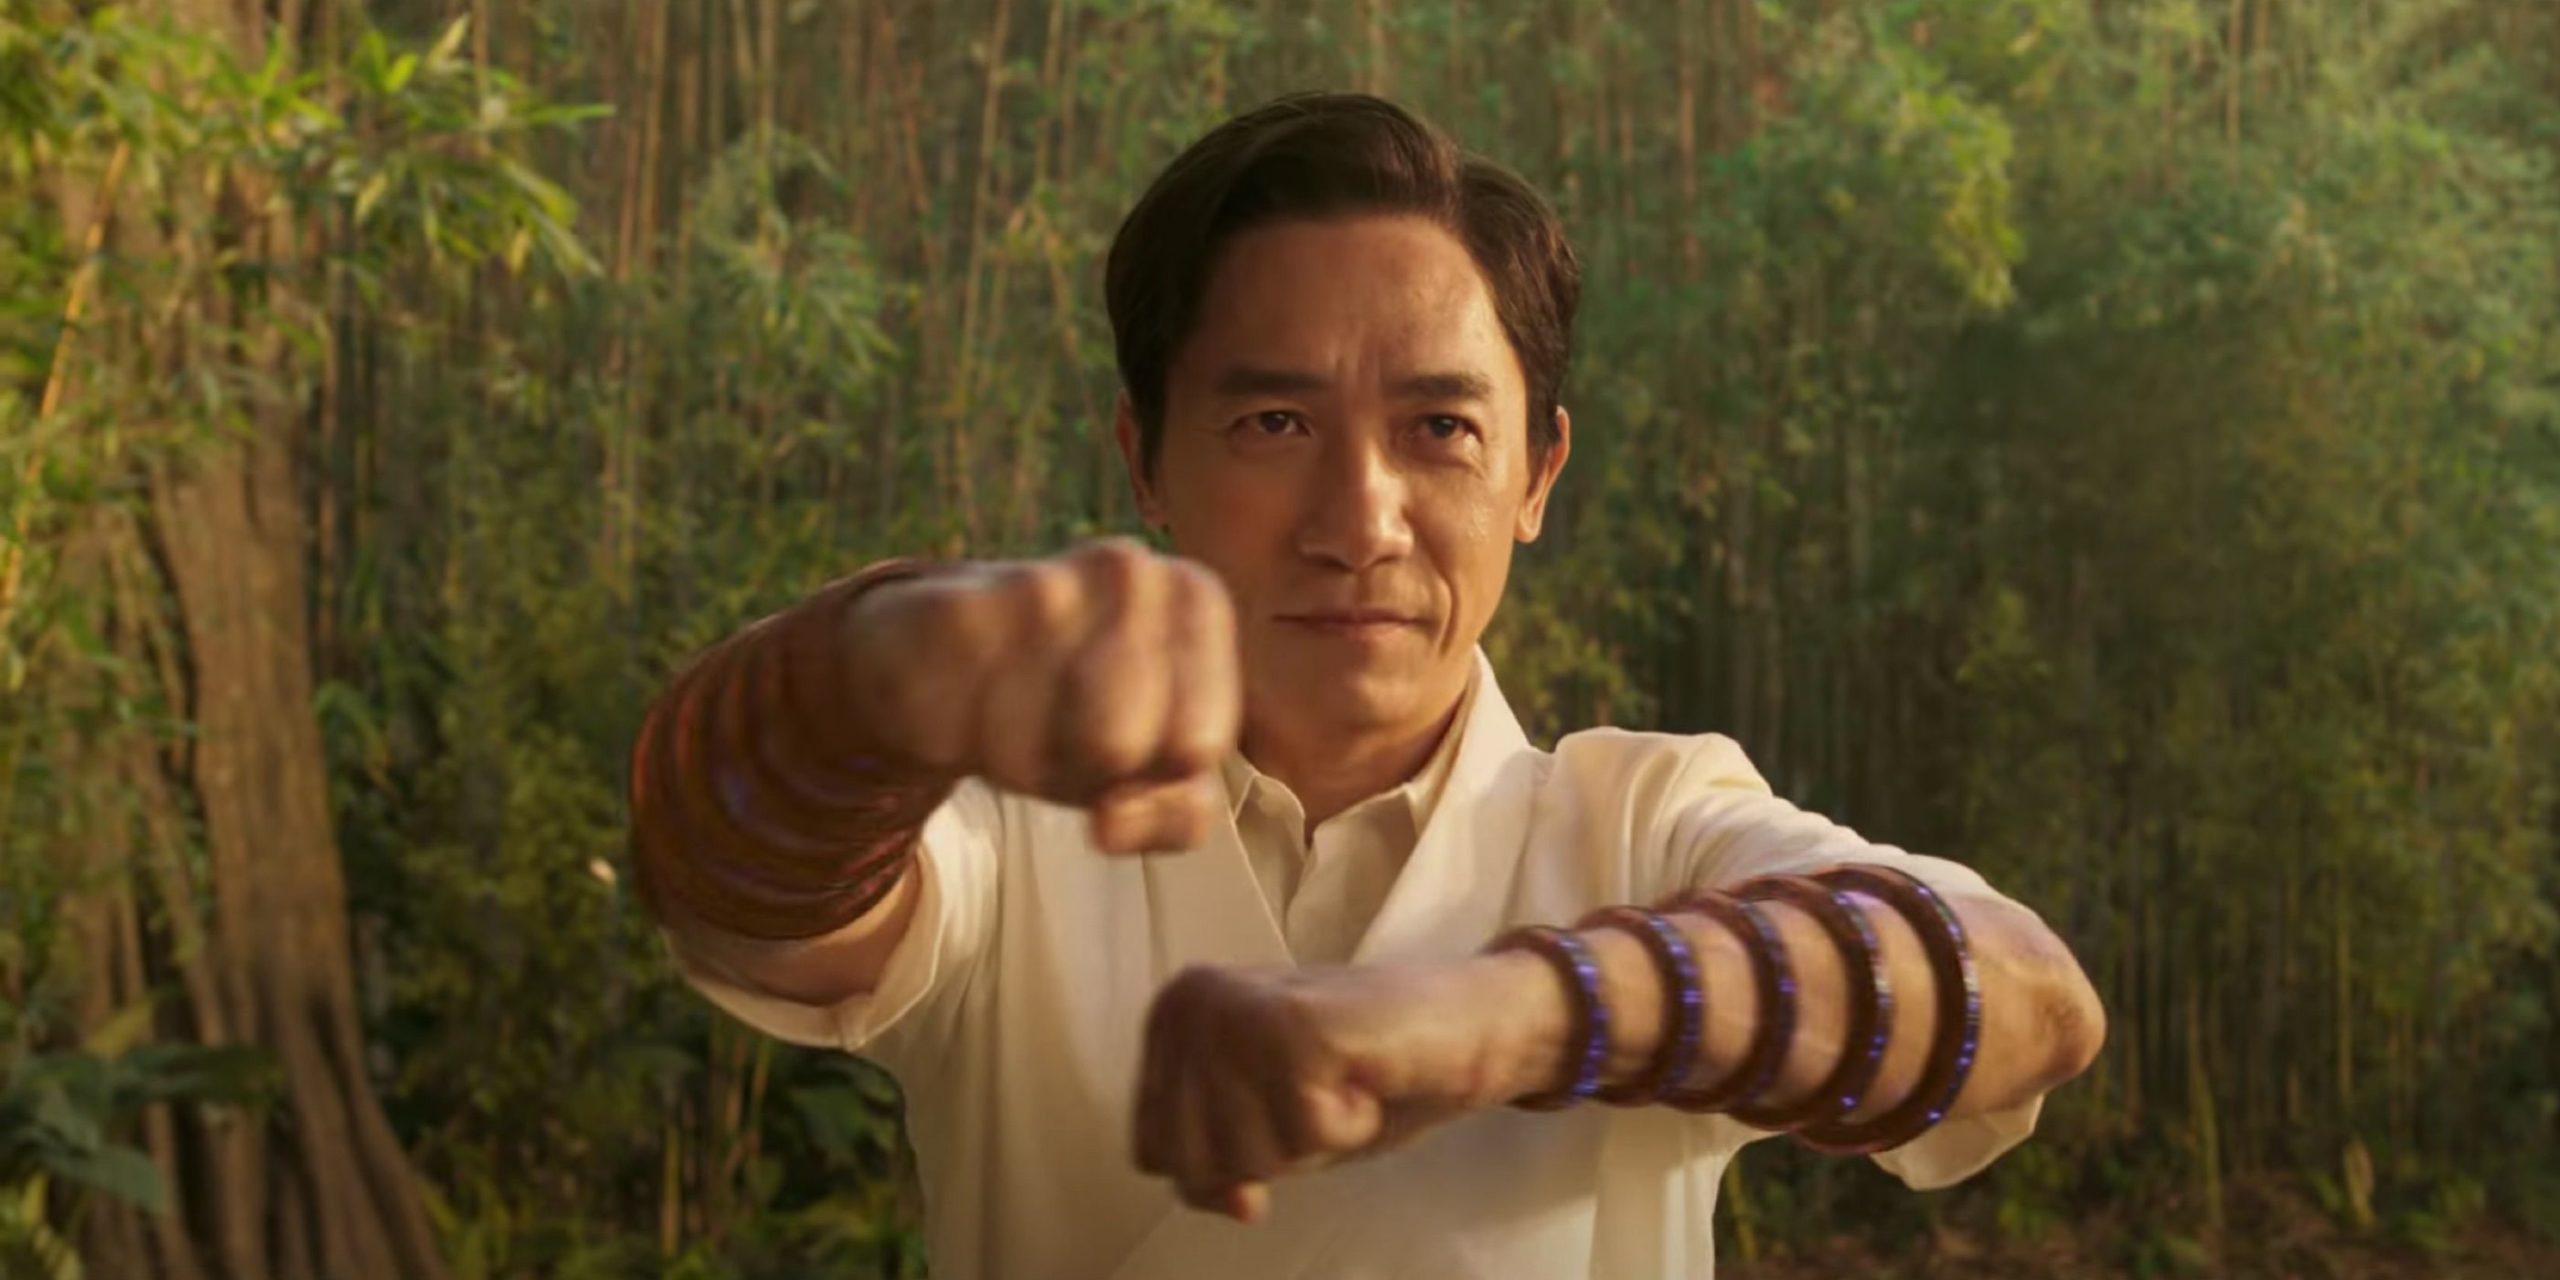 Tony Leung as Wenwu in 'Shang-Chi and the Legend of the Ten Rings' (2021).